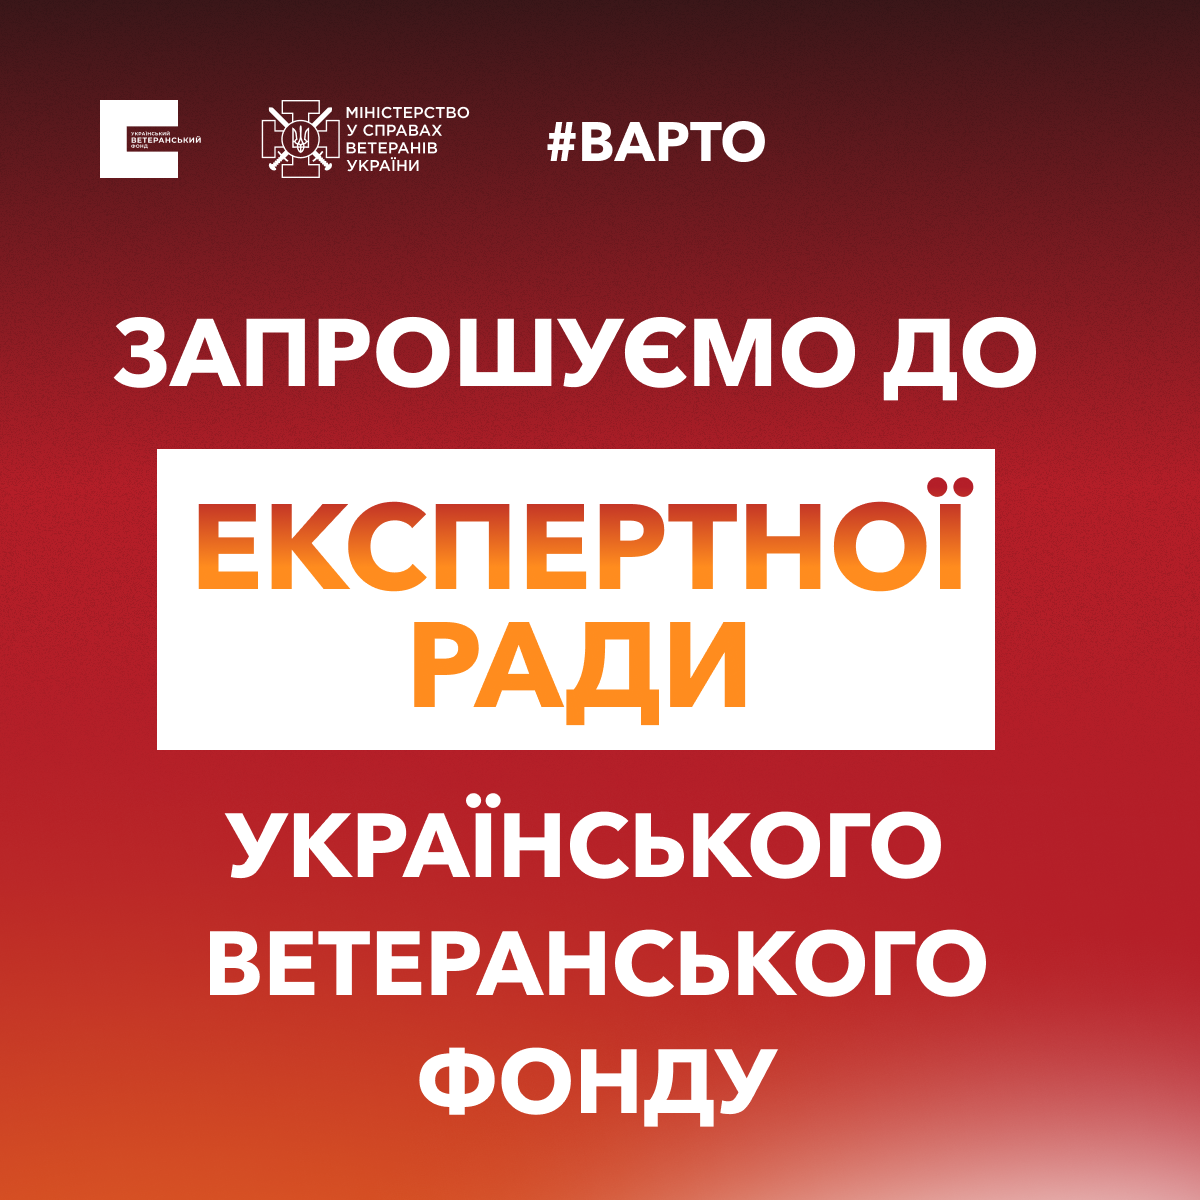 The competitive selection of experts to the Expert Council of the Ukrainian Veterans Foundation for the “VARTO Start Your Own Business” projects has started